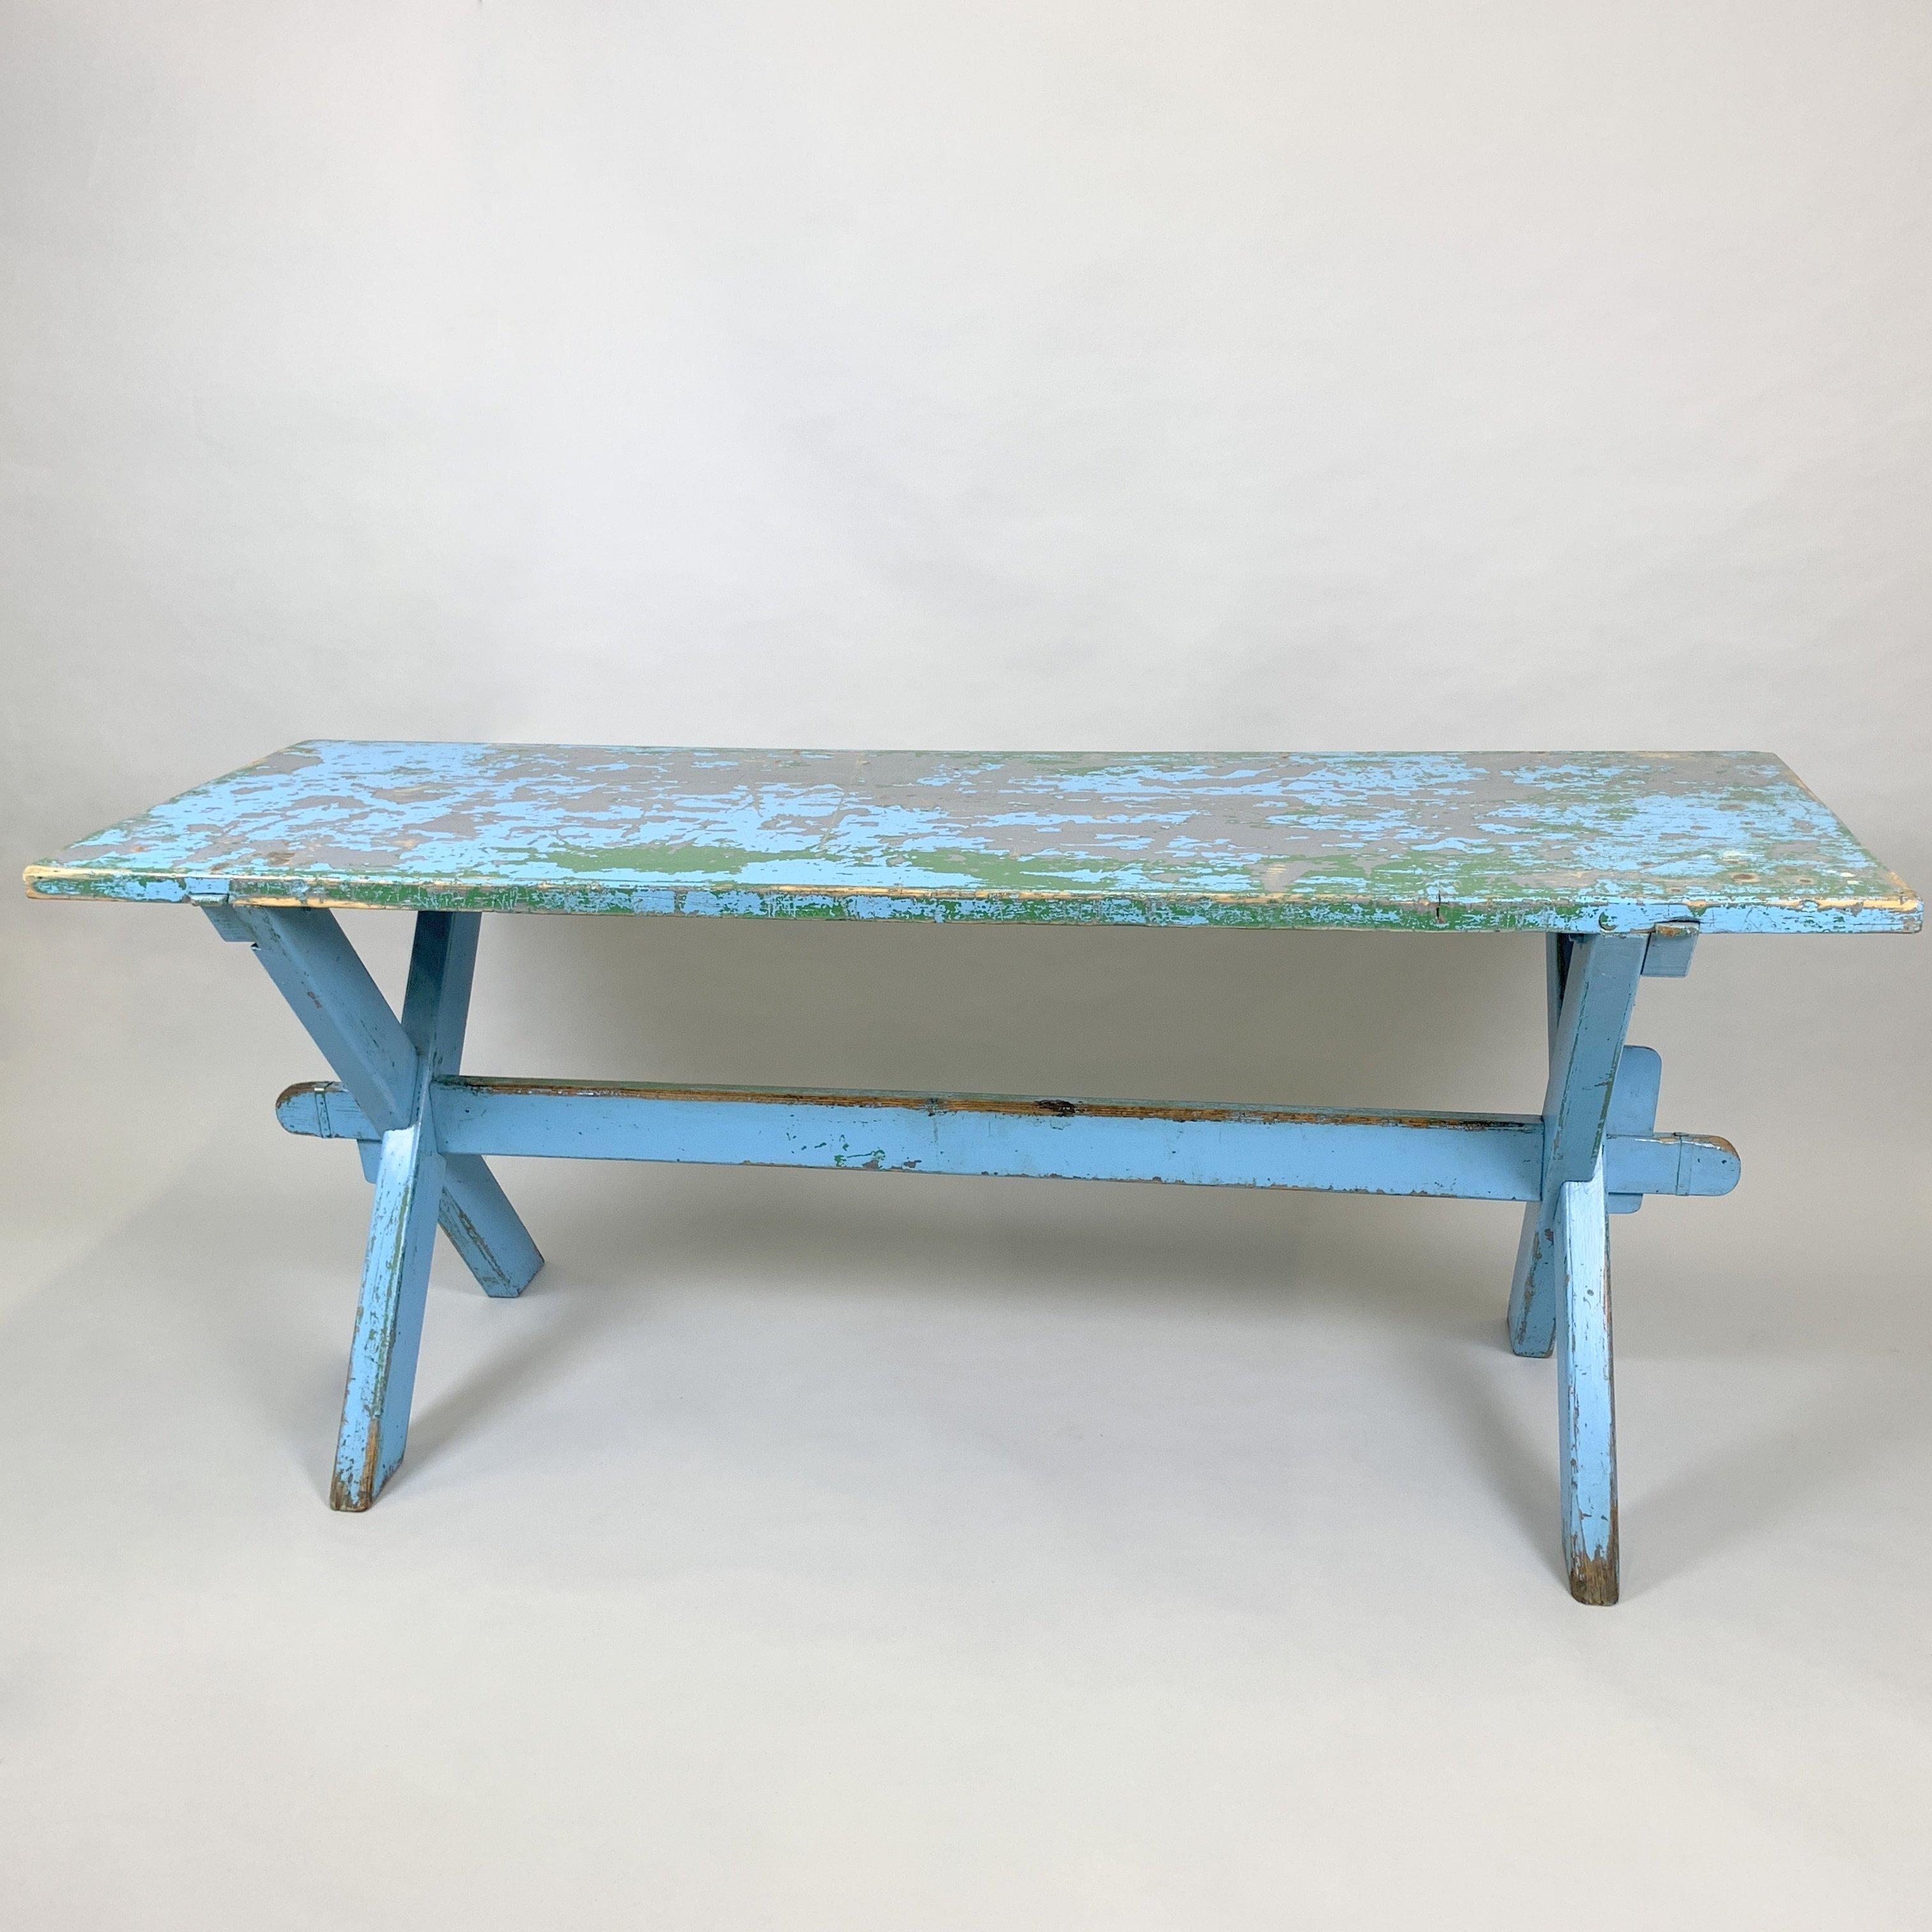 This unique work table from a factory in the former Czechoslovakia can be easily used as a dining table and make your interior truly special. Completely cleaned and sealed with a special oil.